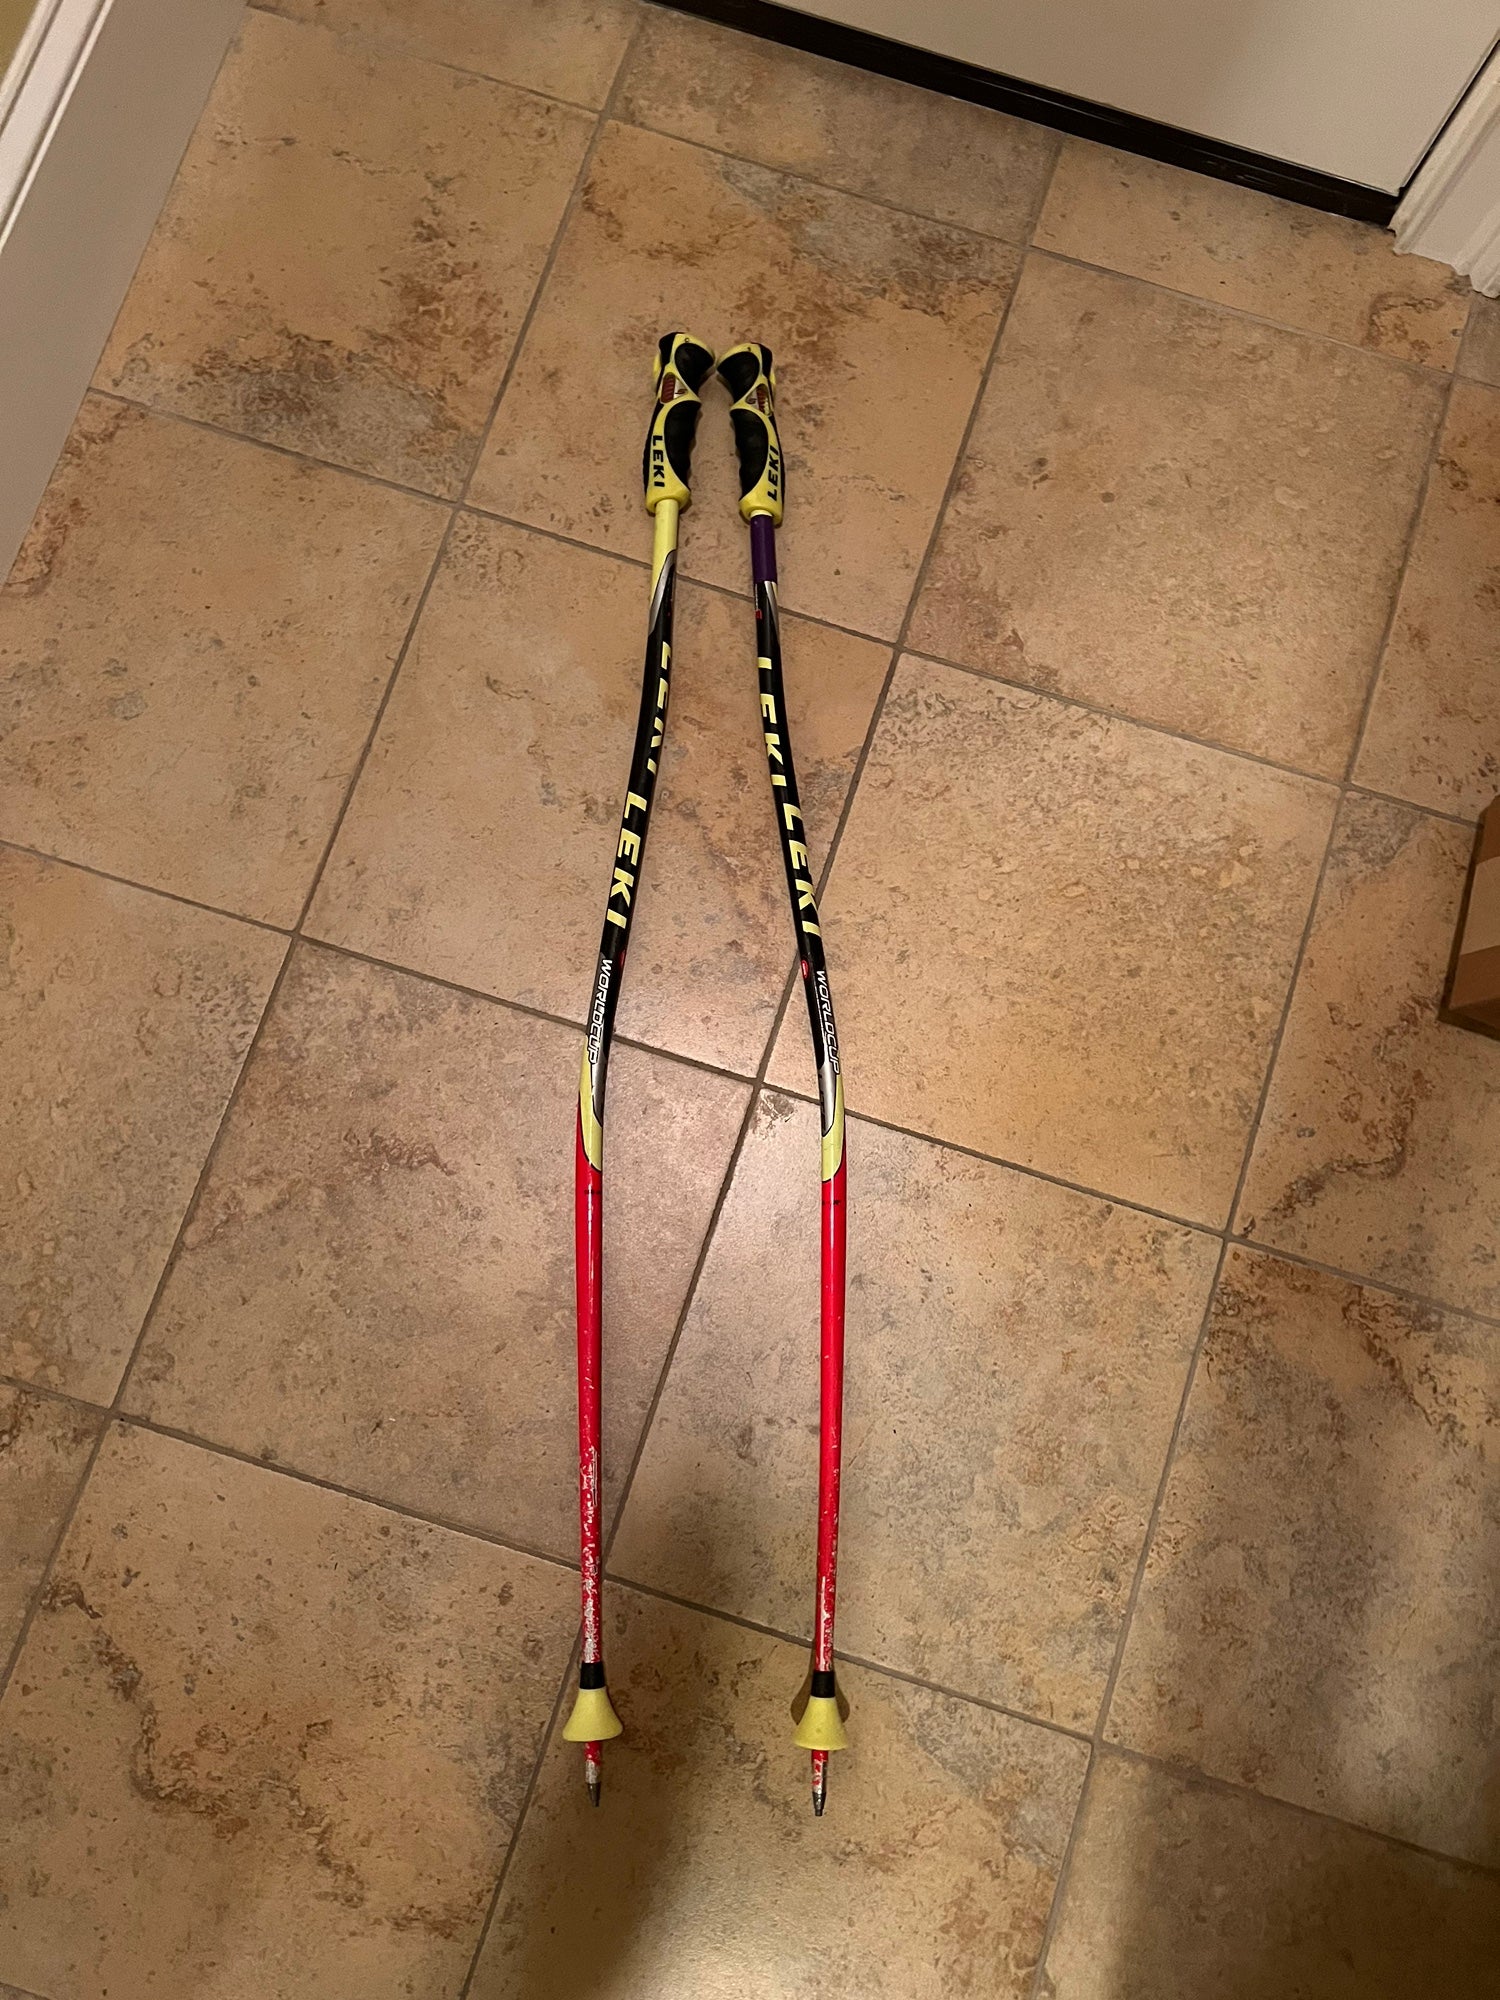 Used 40in (100cm) Racing World Cup Lite GS Ski Poles | SidelineSwap